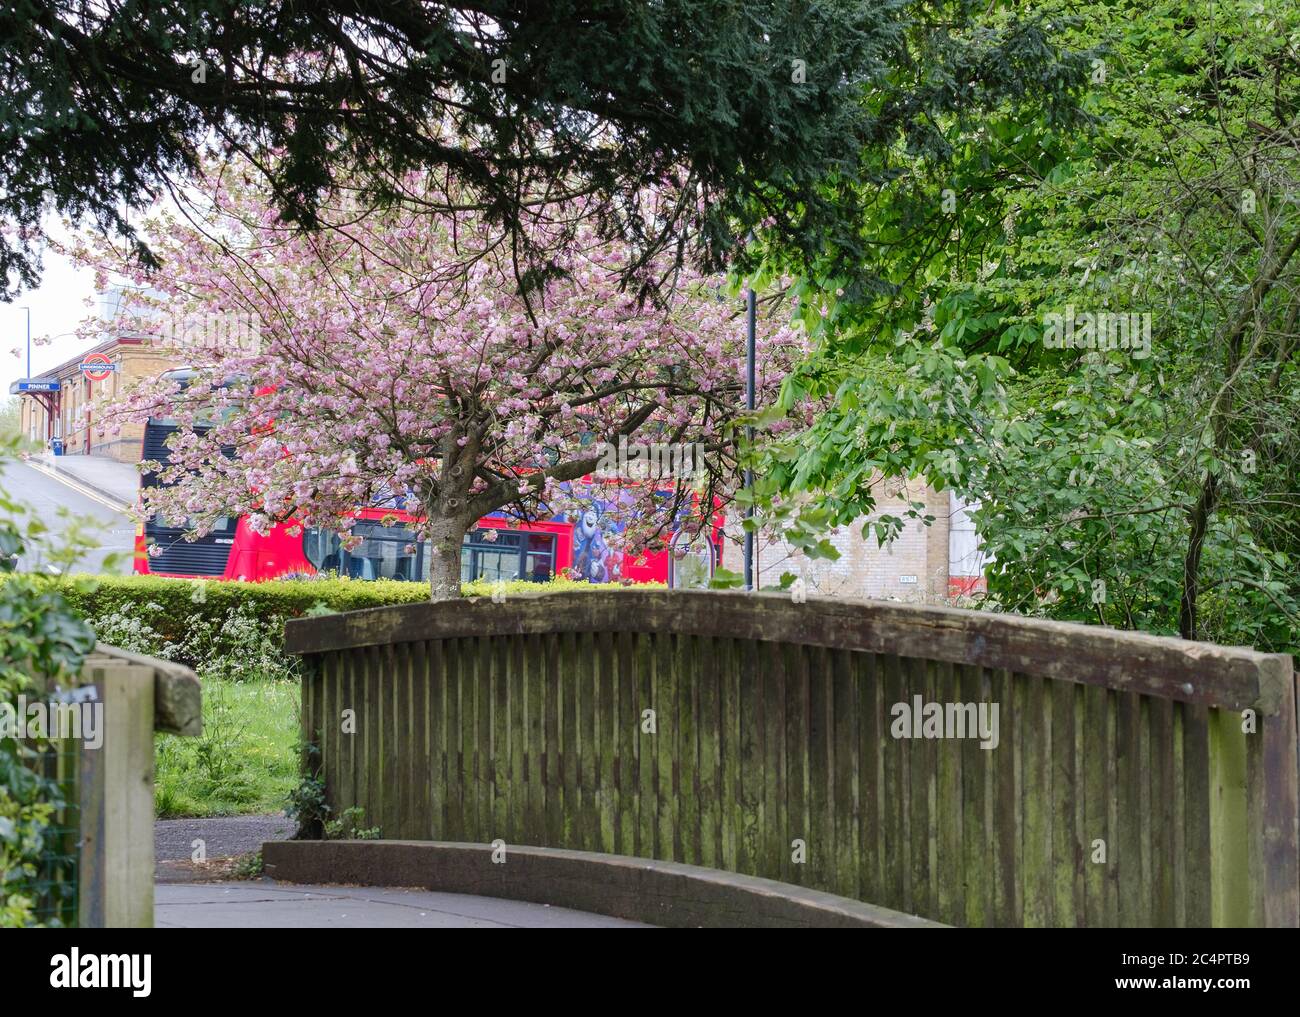 Short pedestrian bridge with trees & foliage, looking  towards Pinner Underground Station, in the Spring & London Bus behind tree with pink blossoms. Stock Photo